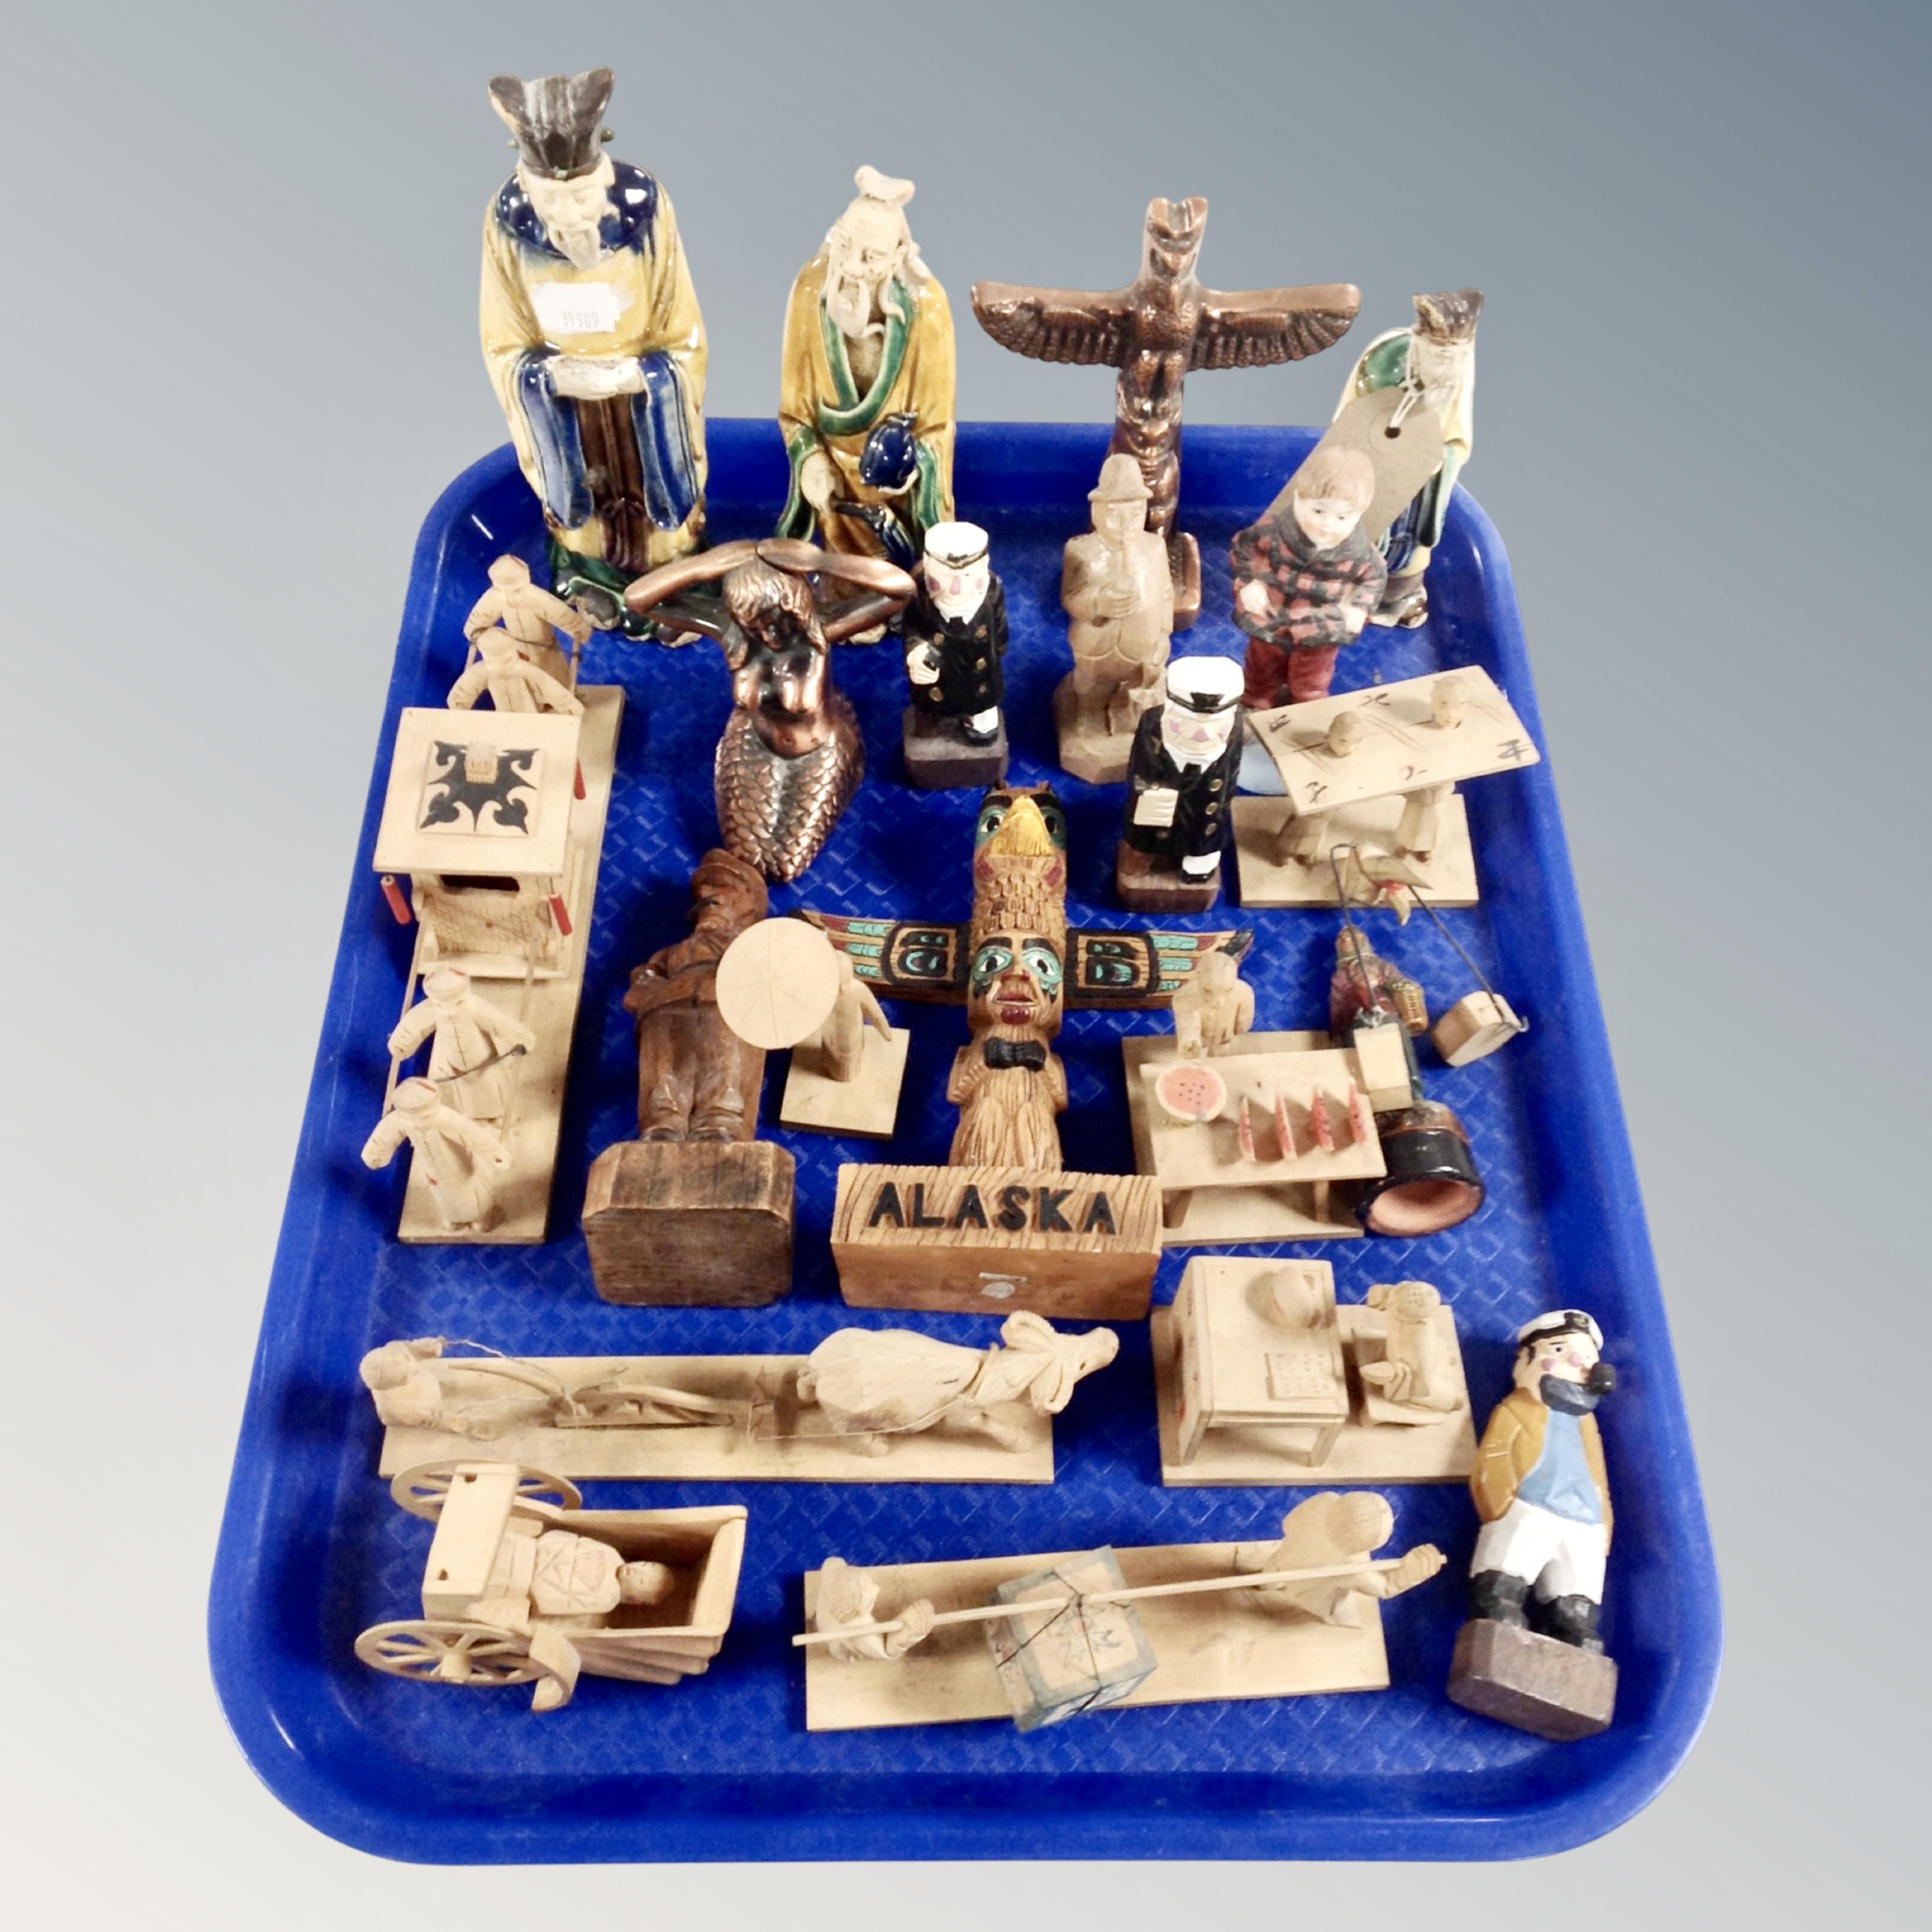 A tray of wooden and ceramic tourist carvings and figures